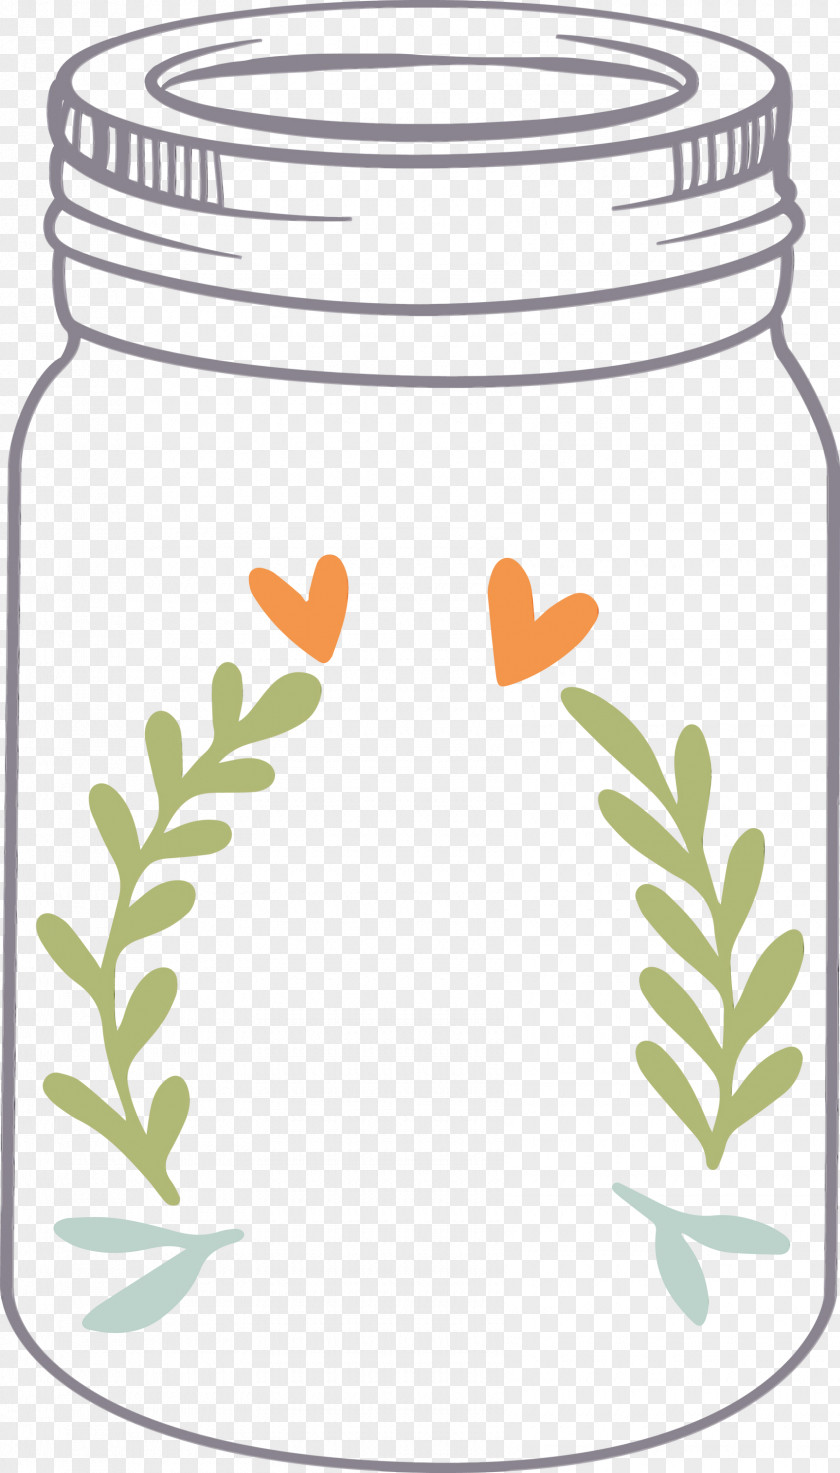 Food Storage Containers Leaf Flower Tree PNG